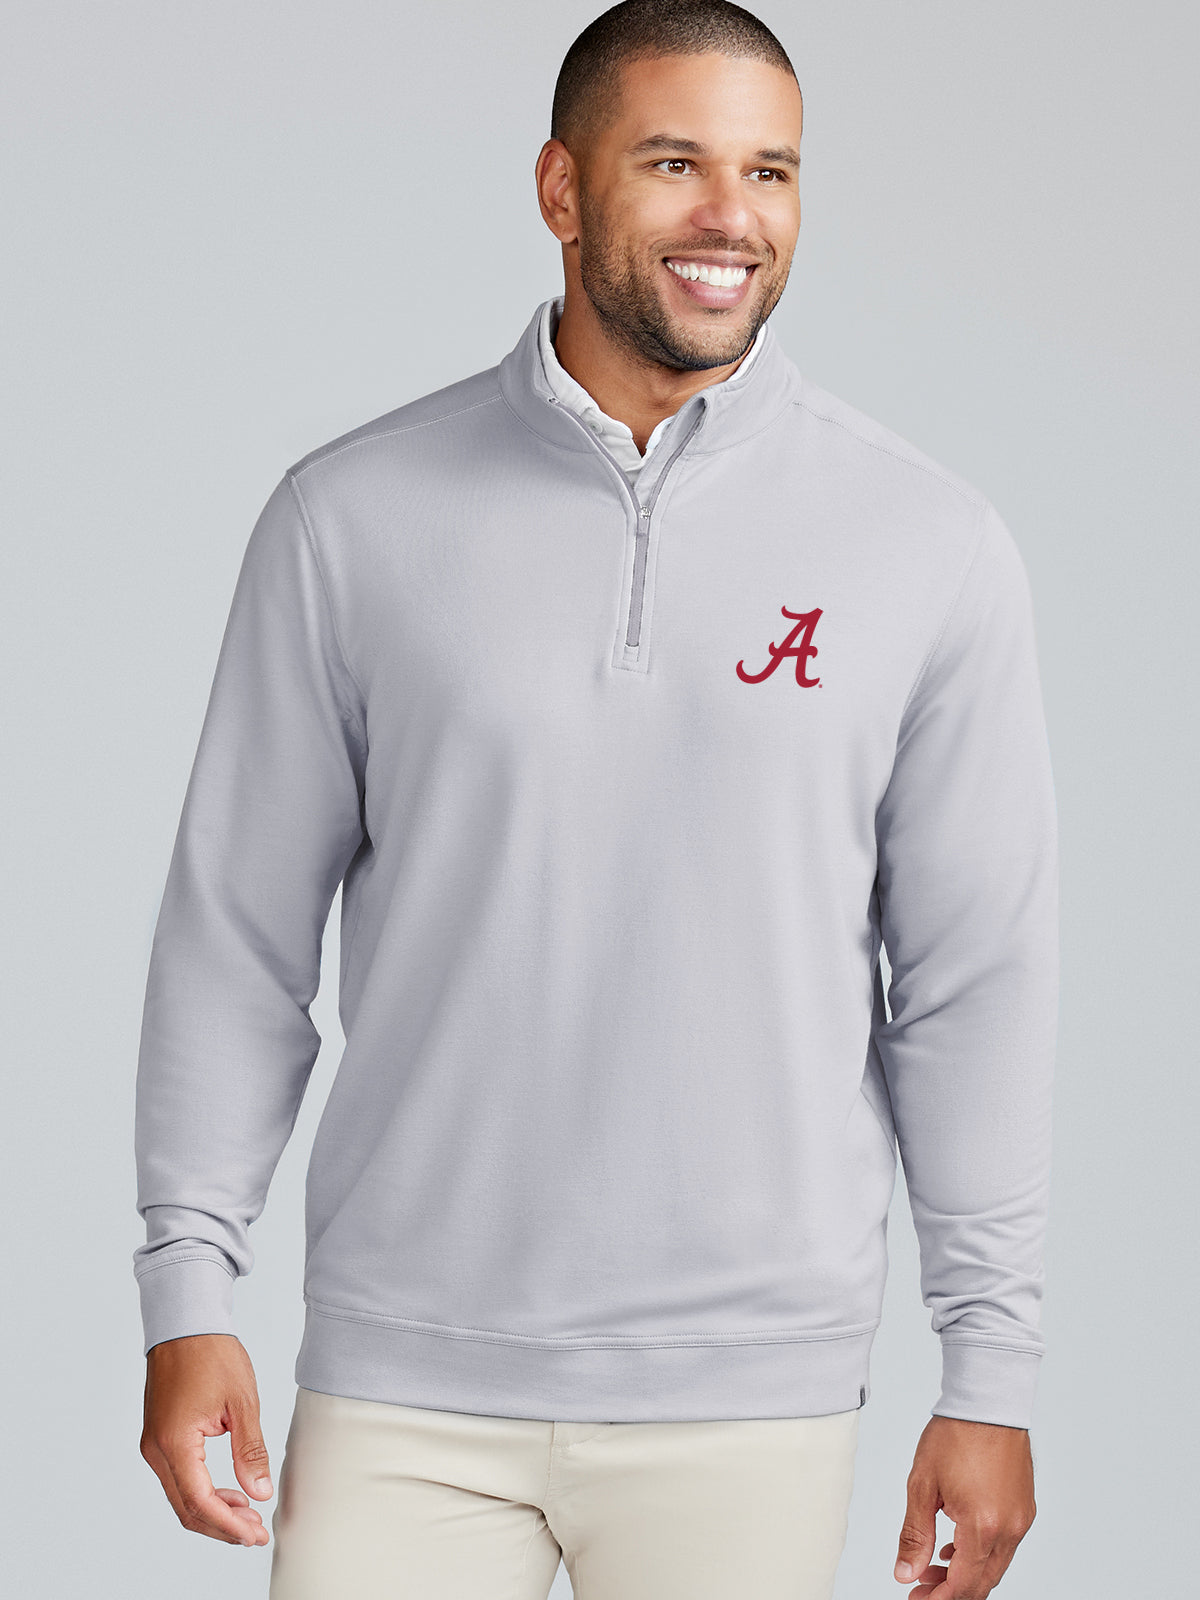 Cloud French Terry Quarter Zip - Alabama - tasc Performance (Alloy)